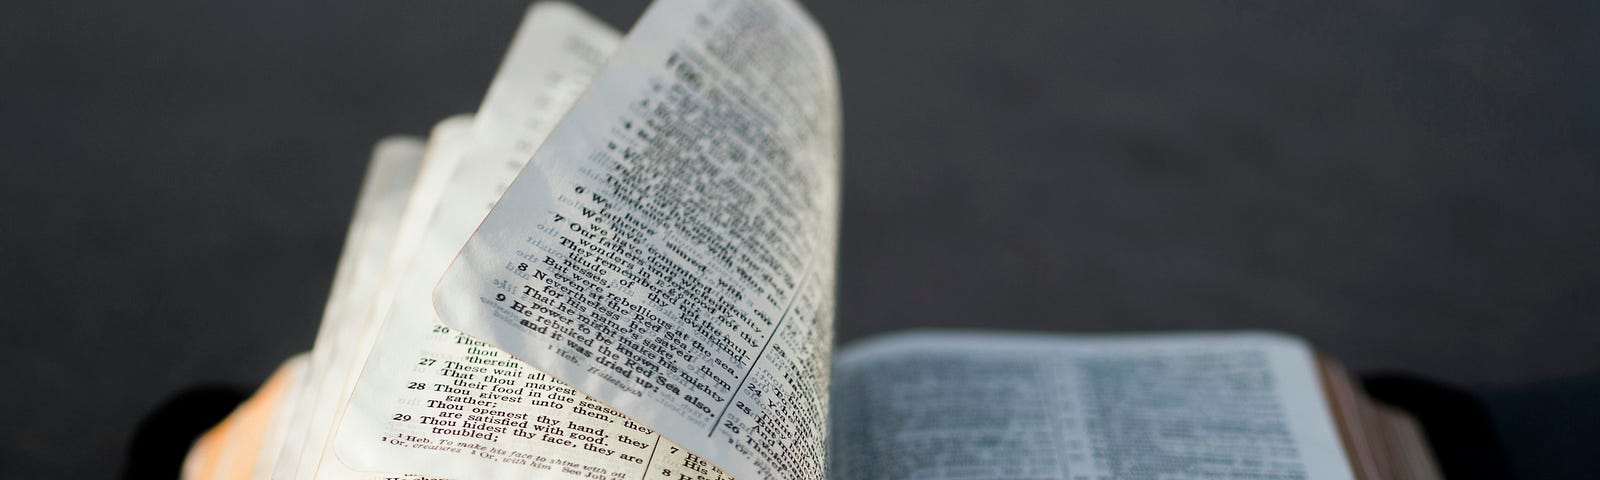 An open Bible with pages turning.